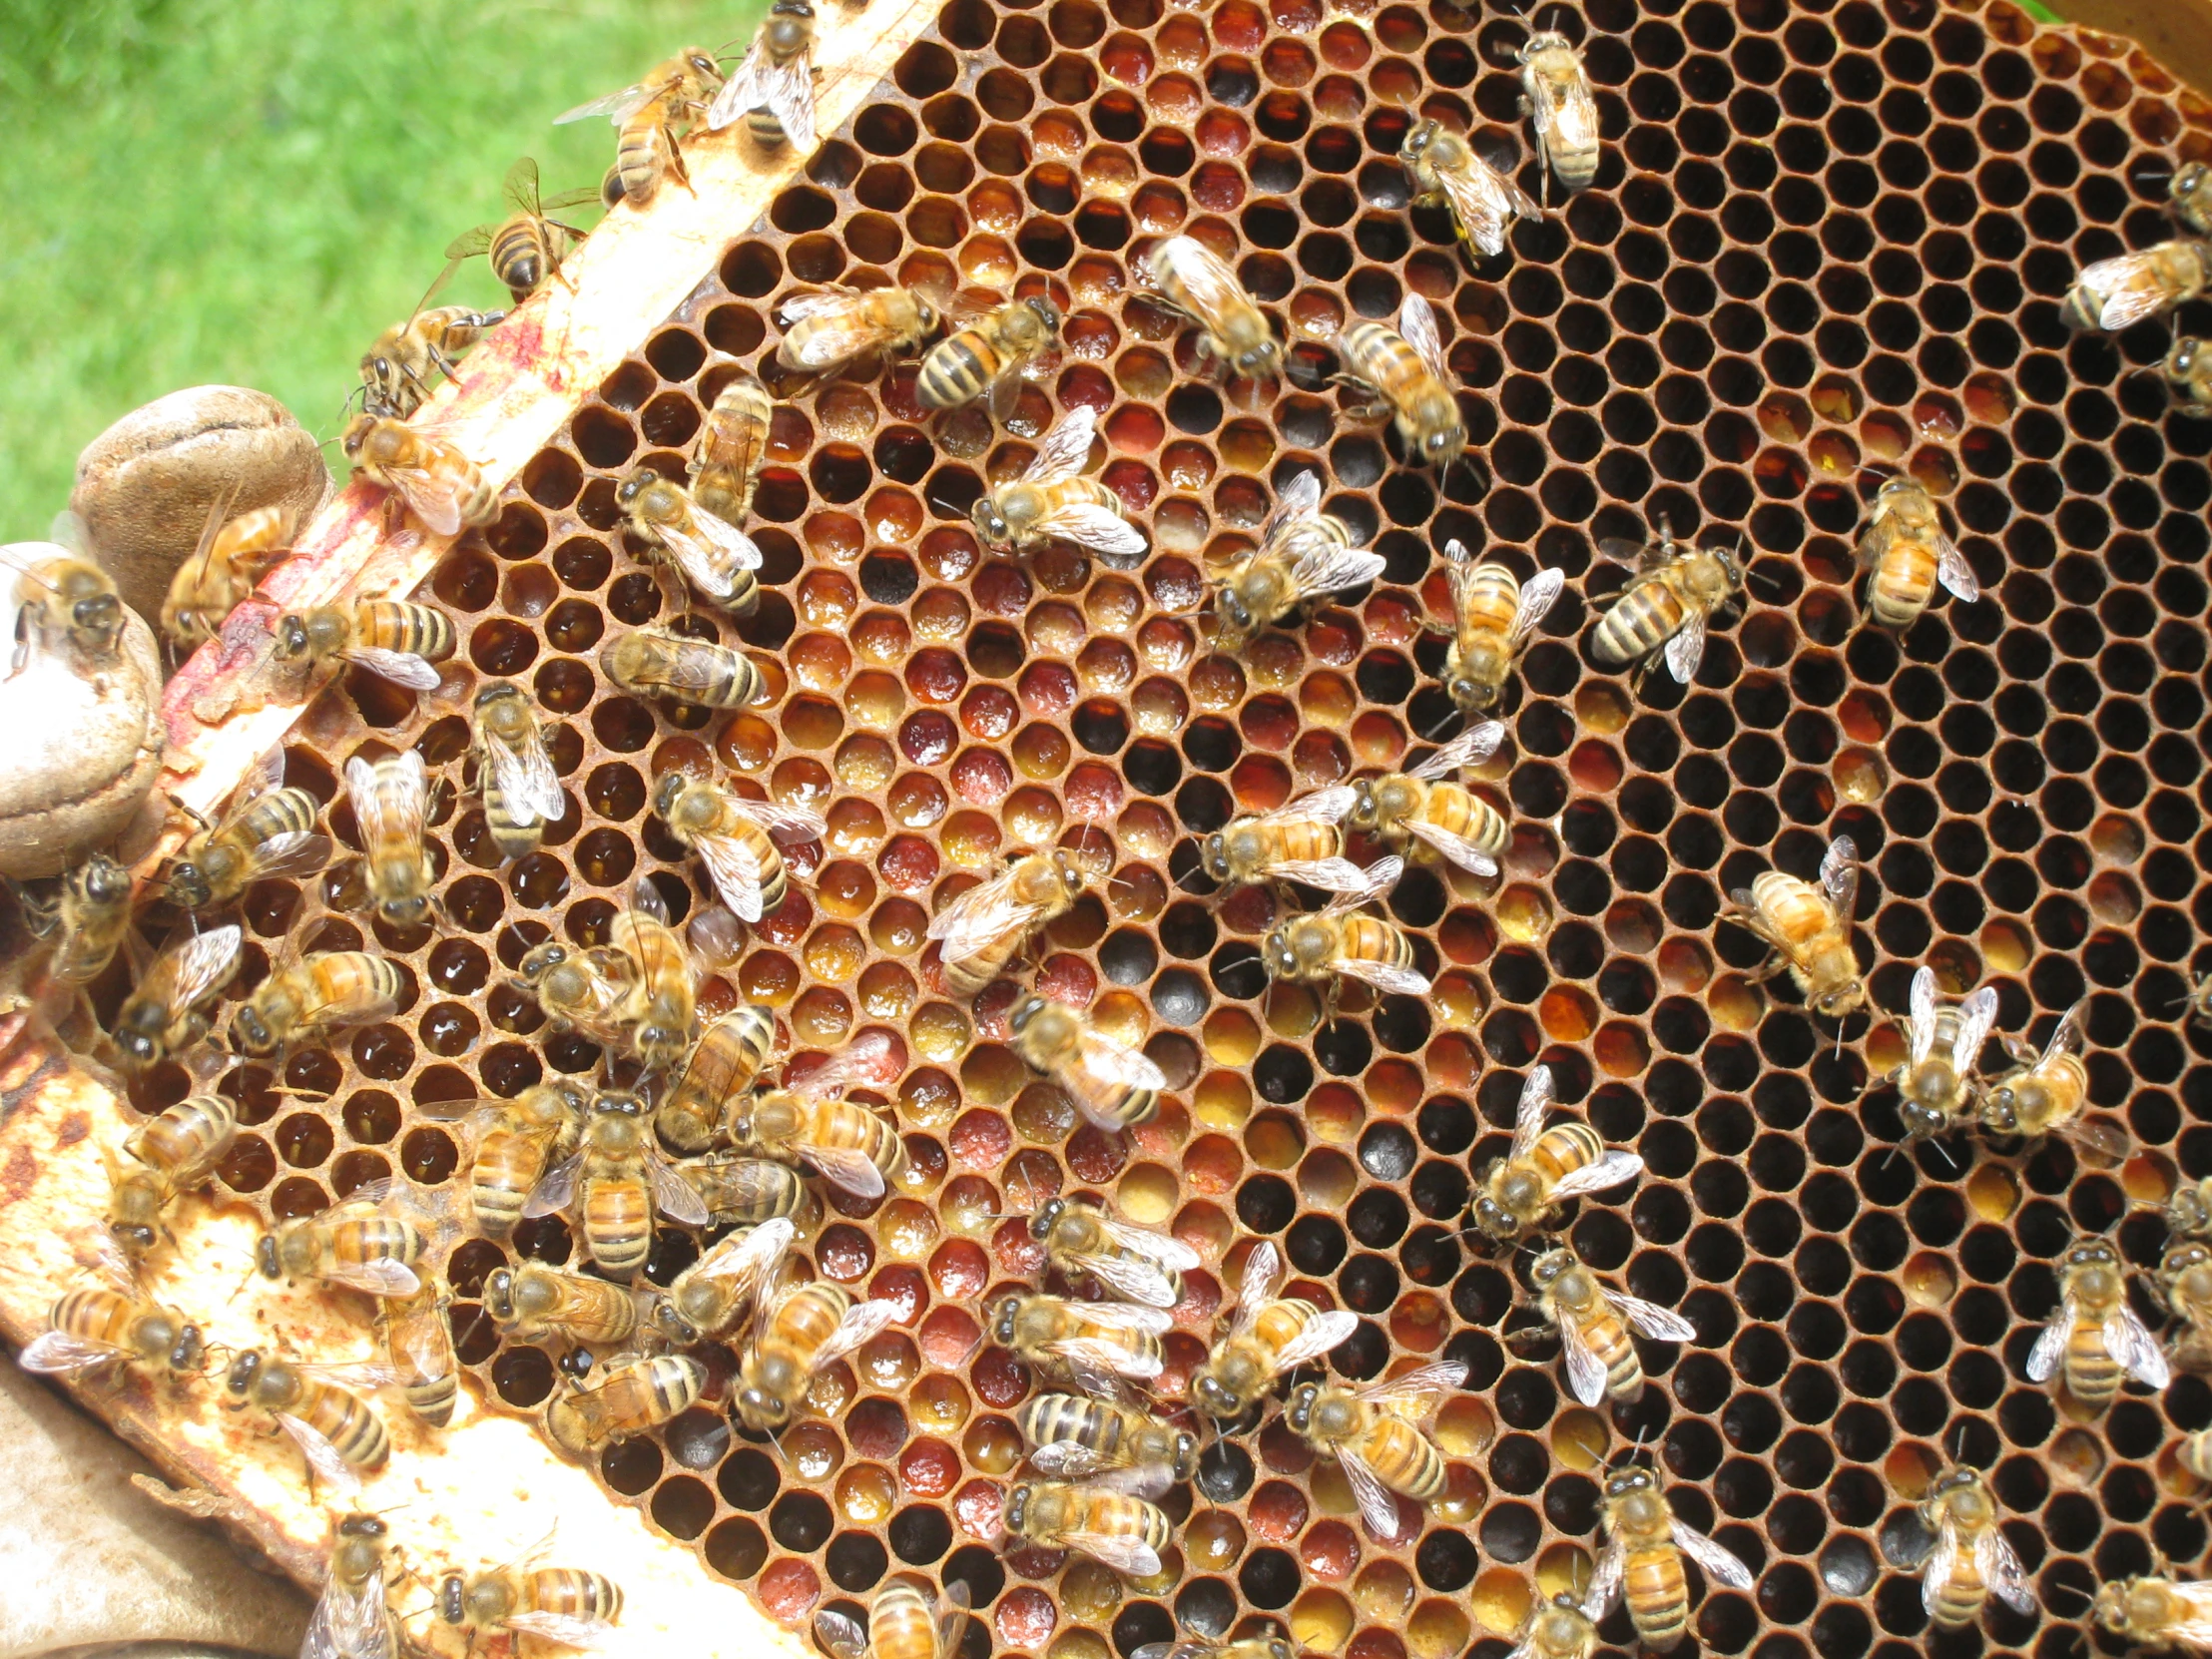 several bee hives lay in a comb on the ground